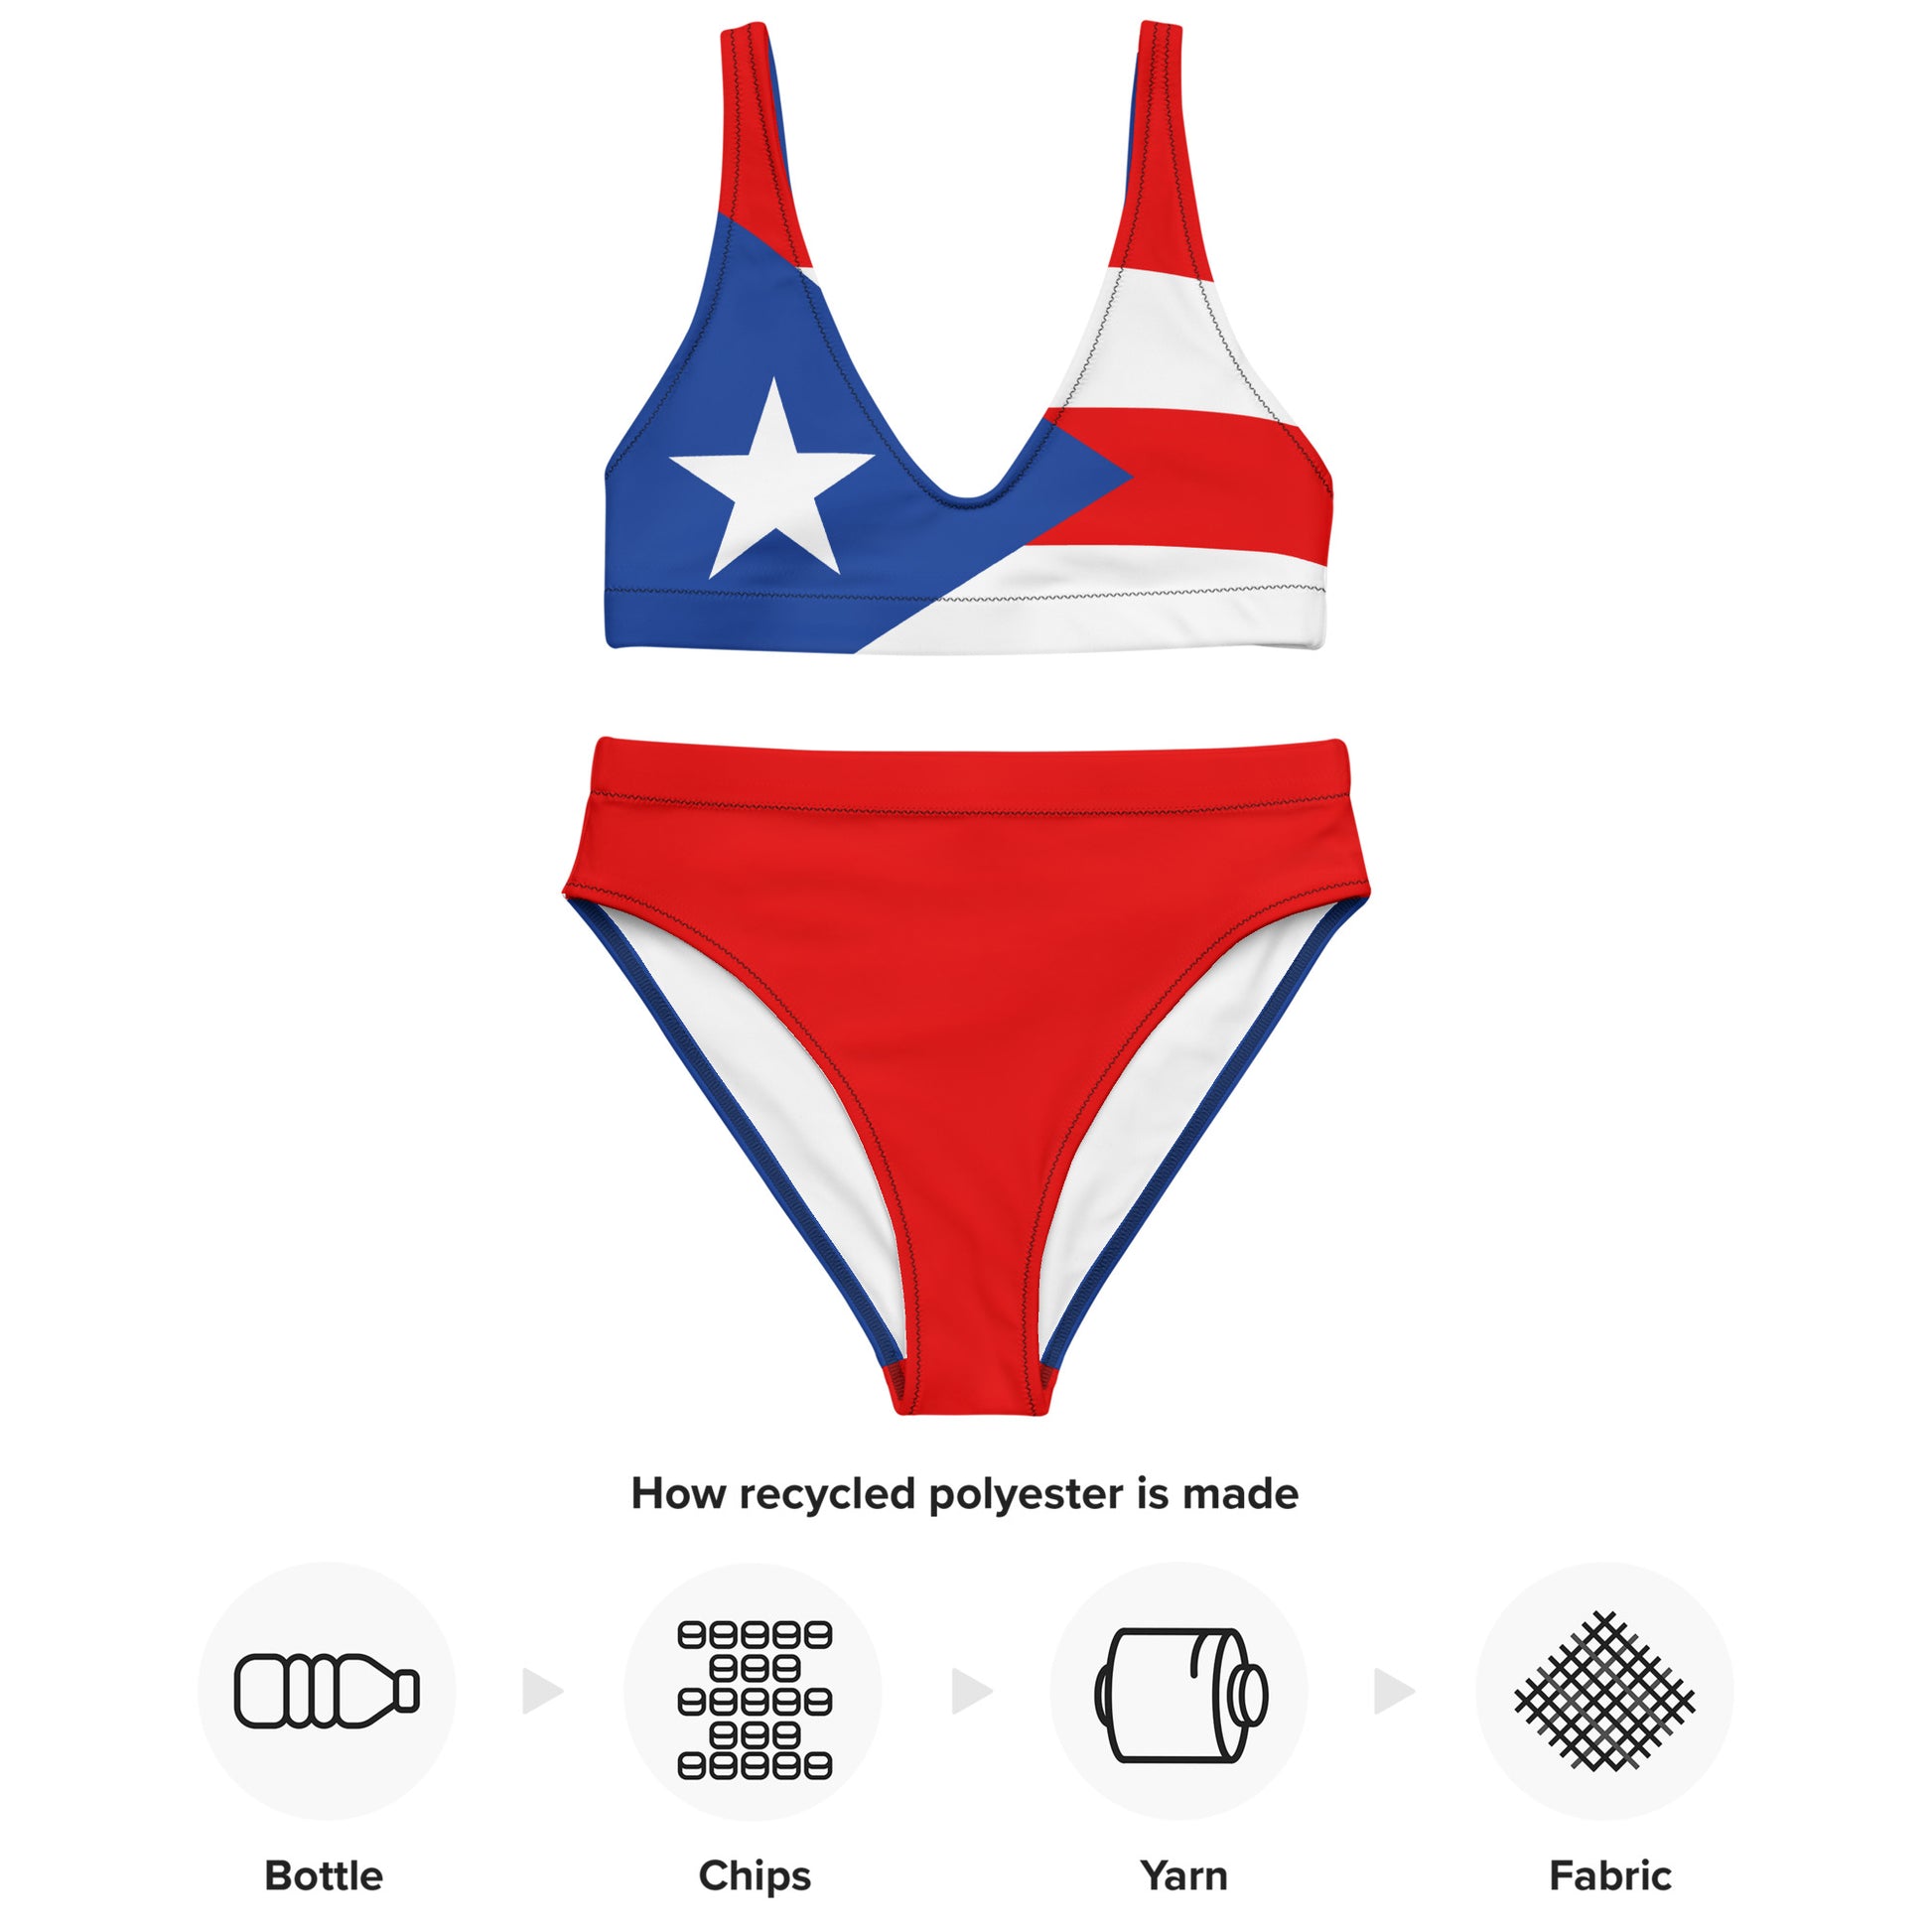 Trendy Bikini with Pride in the Puerto Rican Flag, How Recycled Polyester is made